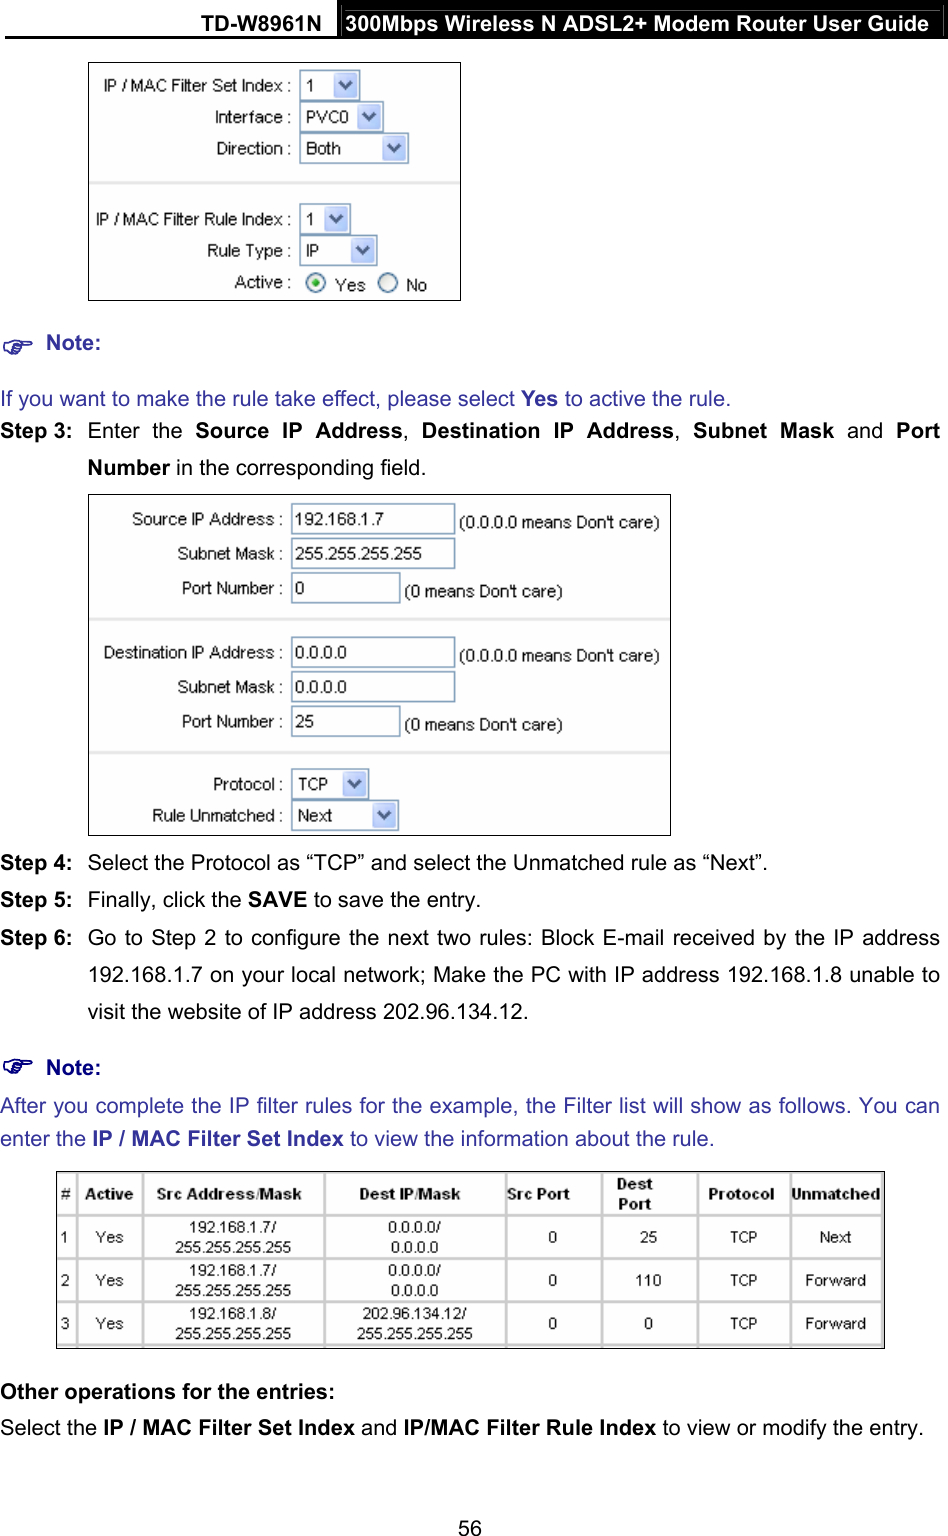 TD-W8961N  300Mbps Wireless N ADSL2+ Modem Router User Guide 56    Note: If you want to make the rule take effect, please select Yes to active the rule. Step 3:  Enter the Source IP Address,  Destination IP Address,  Subnet Mask and Port Number in the corresponding field.  Step 4:  Select the Protocol as “TCP” and select the Unmatched rule as “Next”. Step 5:  Finally, click the SAVE to save the entry. Step 6:  Go to Step 2 to configure the next two rules: Block E-mail received by the IP address 192.168.1.7 on your local network; Make the PC with IP address 192.168.1.8 unable to visit the website of IP address 202.96.134.12.  Note: After you complete the IP filter rules for the example, the Filter list will show as follows. You can enter the IP / MAC Filter Set Index to view the information about the rule.  Other operations for the entries: Select the IP / MAC Filter Set Index and IP/MAC Filter Rule Index to view or modify the entry. 